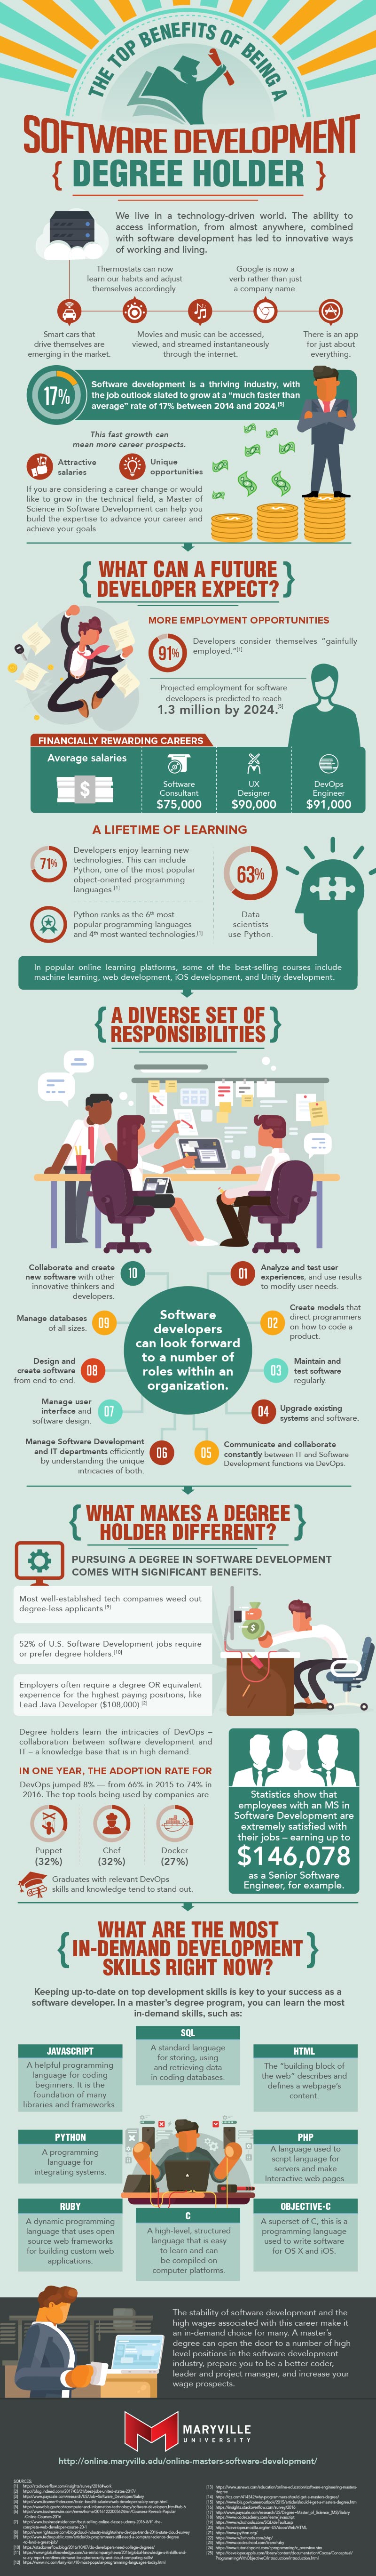 software engineering infographic